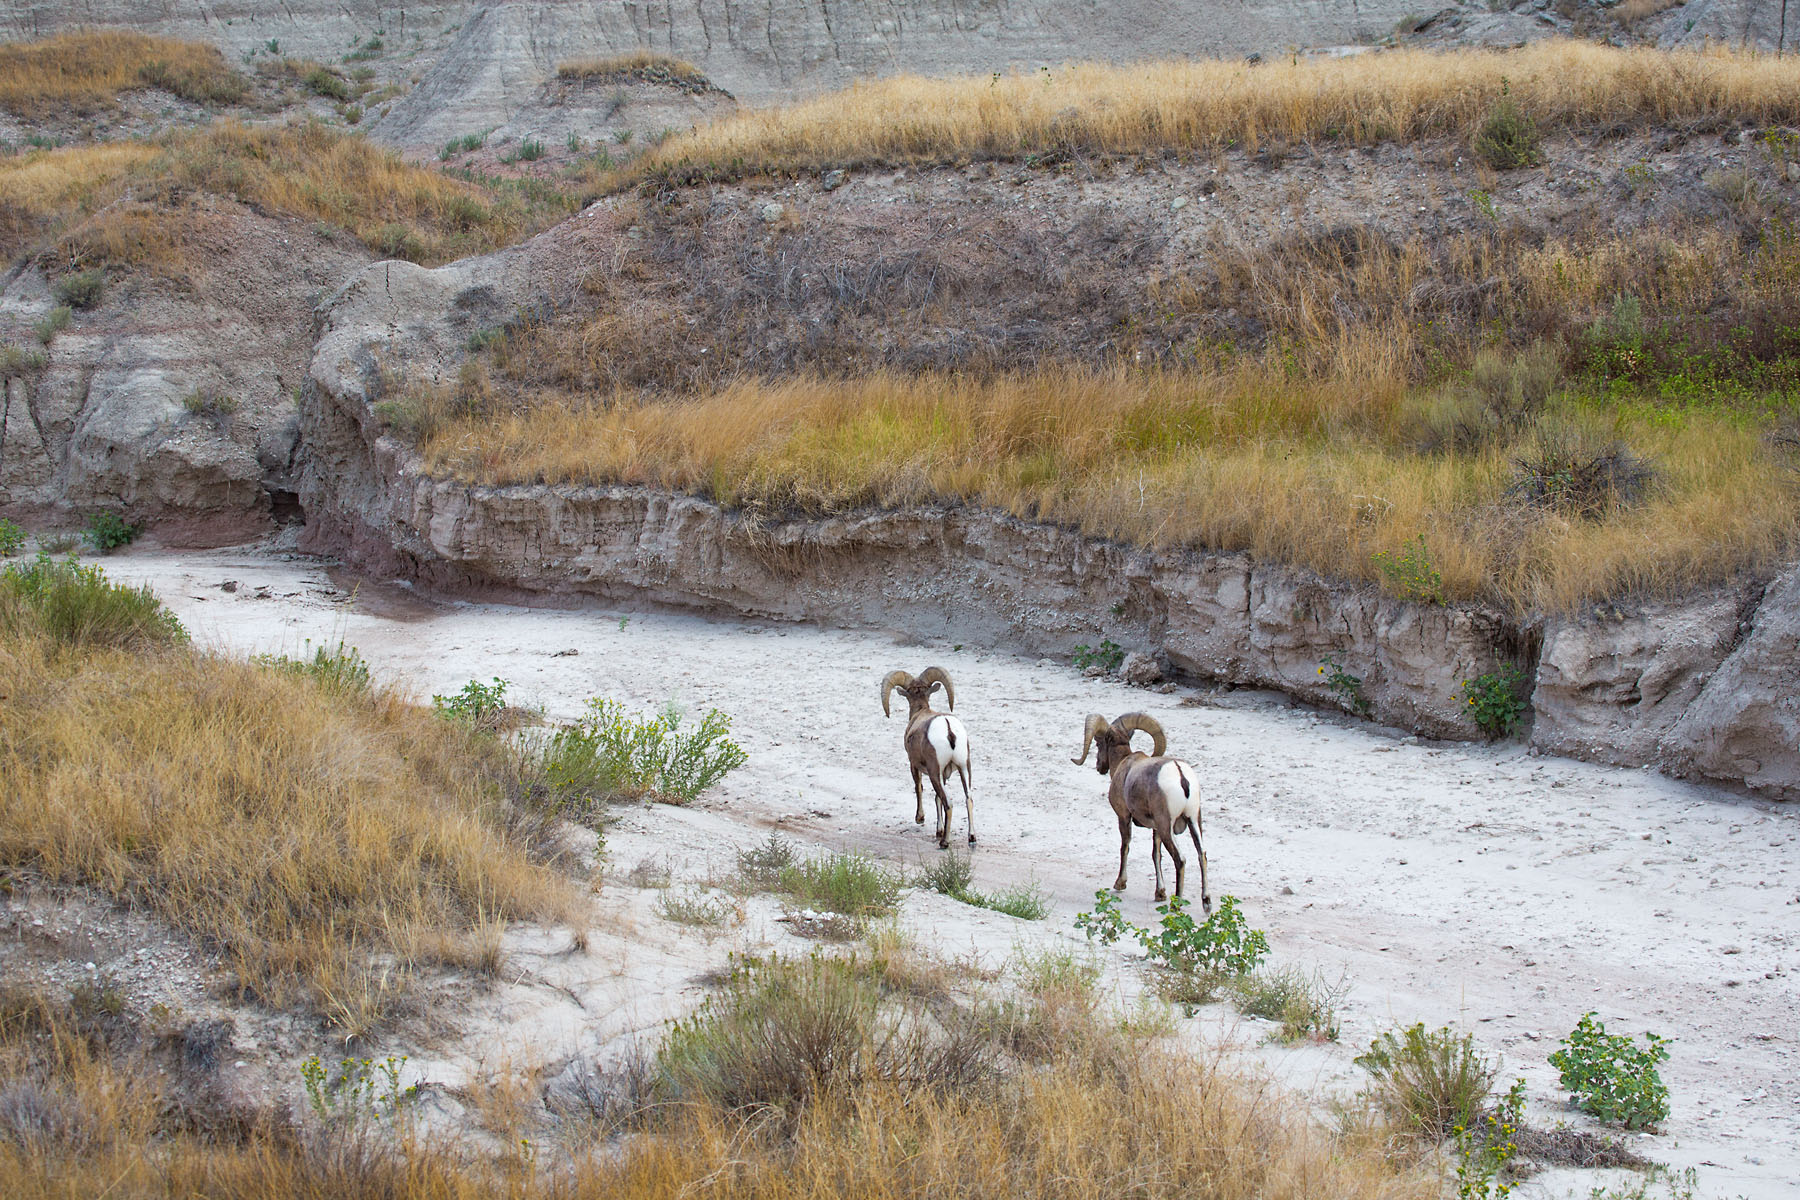 Bighorns in a dry creek bed, Badlands National Park.  Click for next photo.